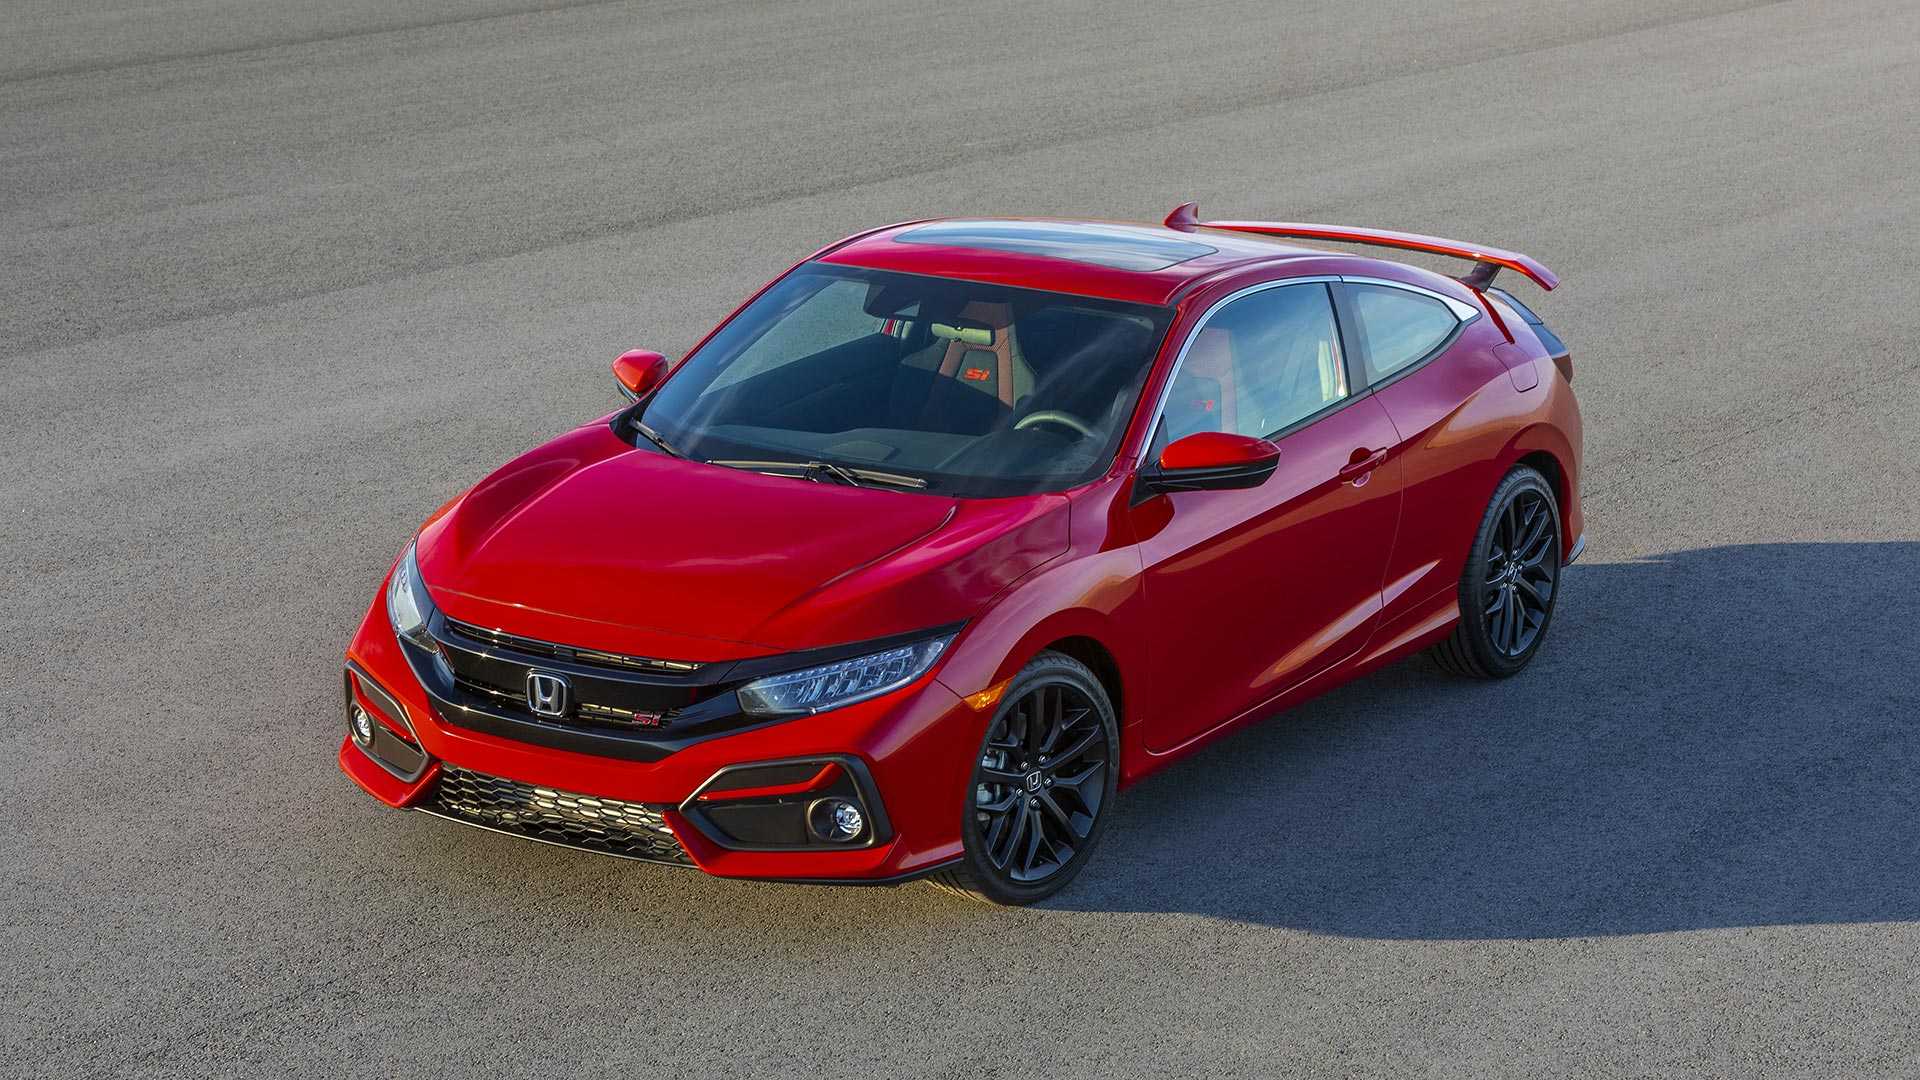 Honda Civic Si Launching with Styling and Performance Updates